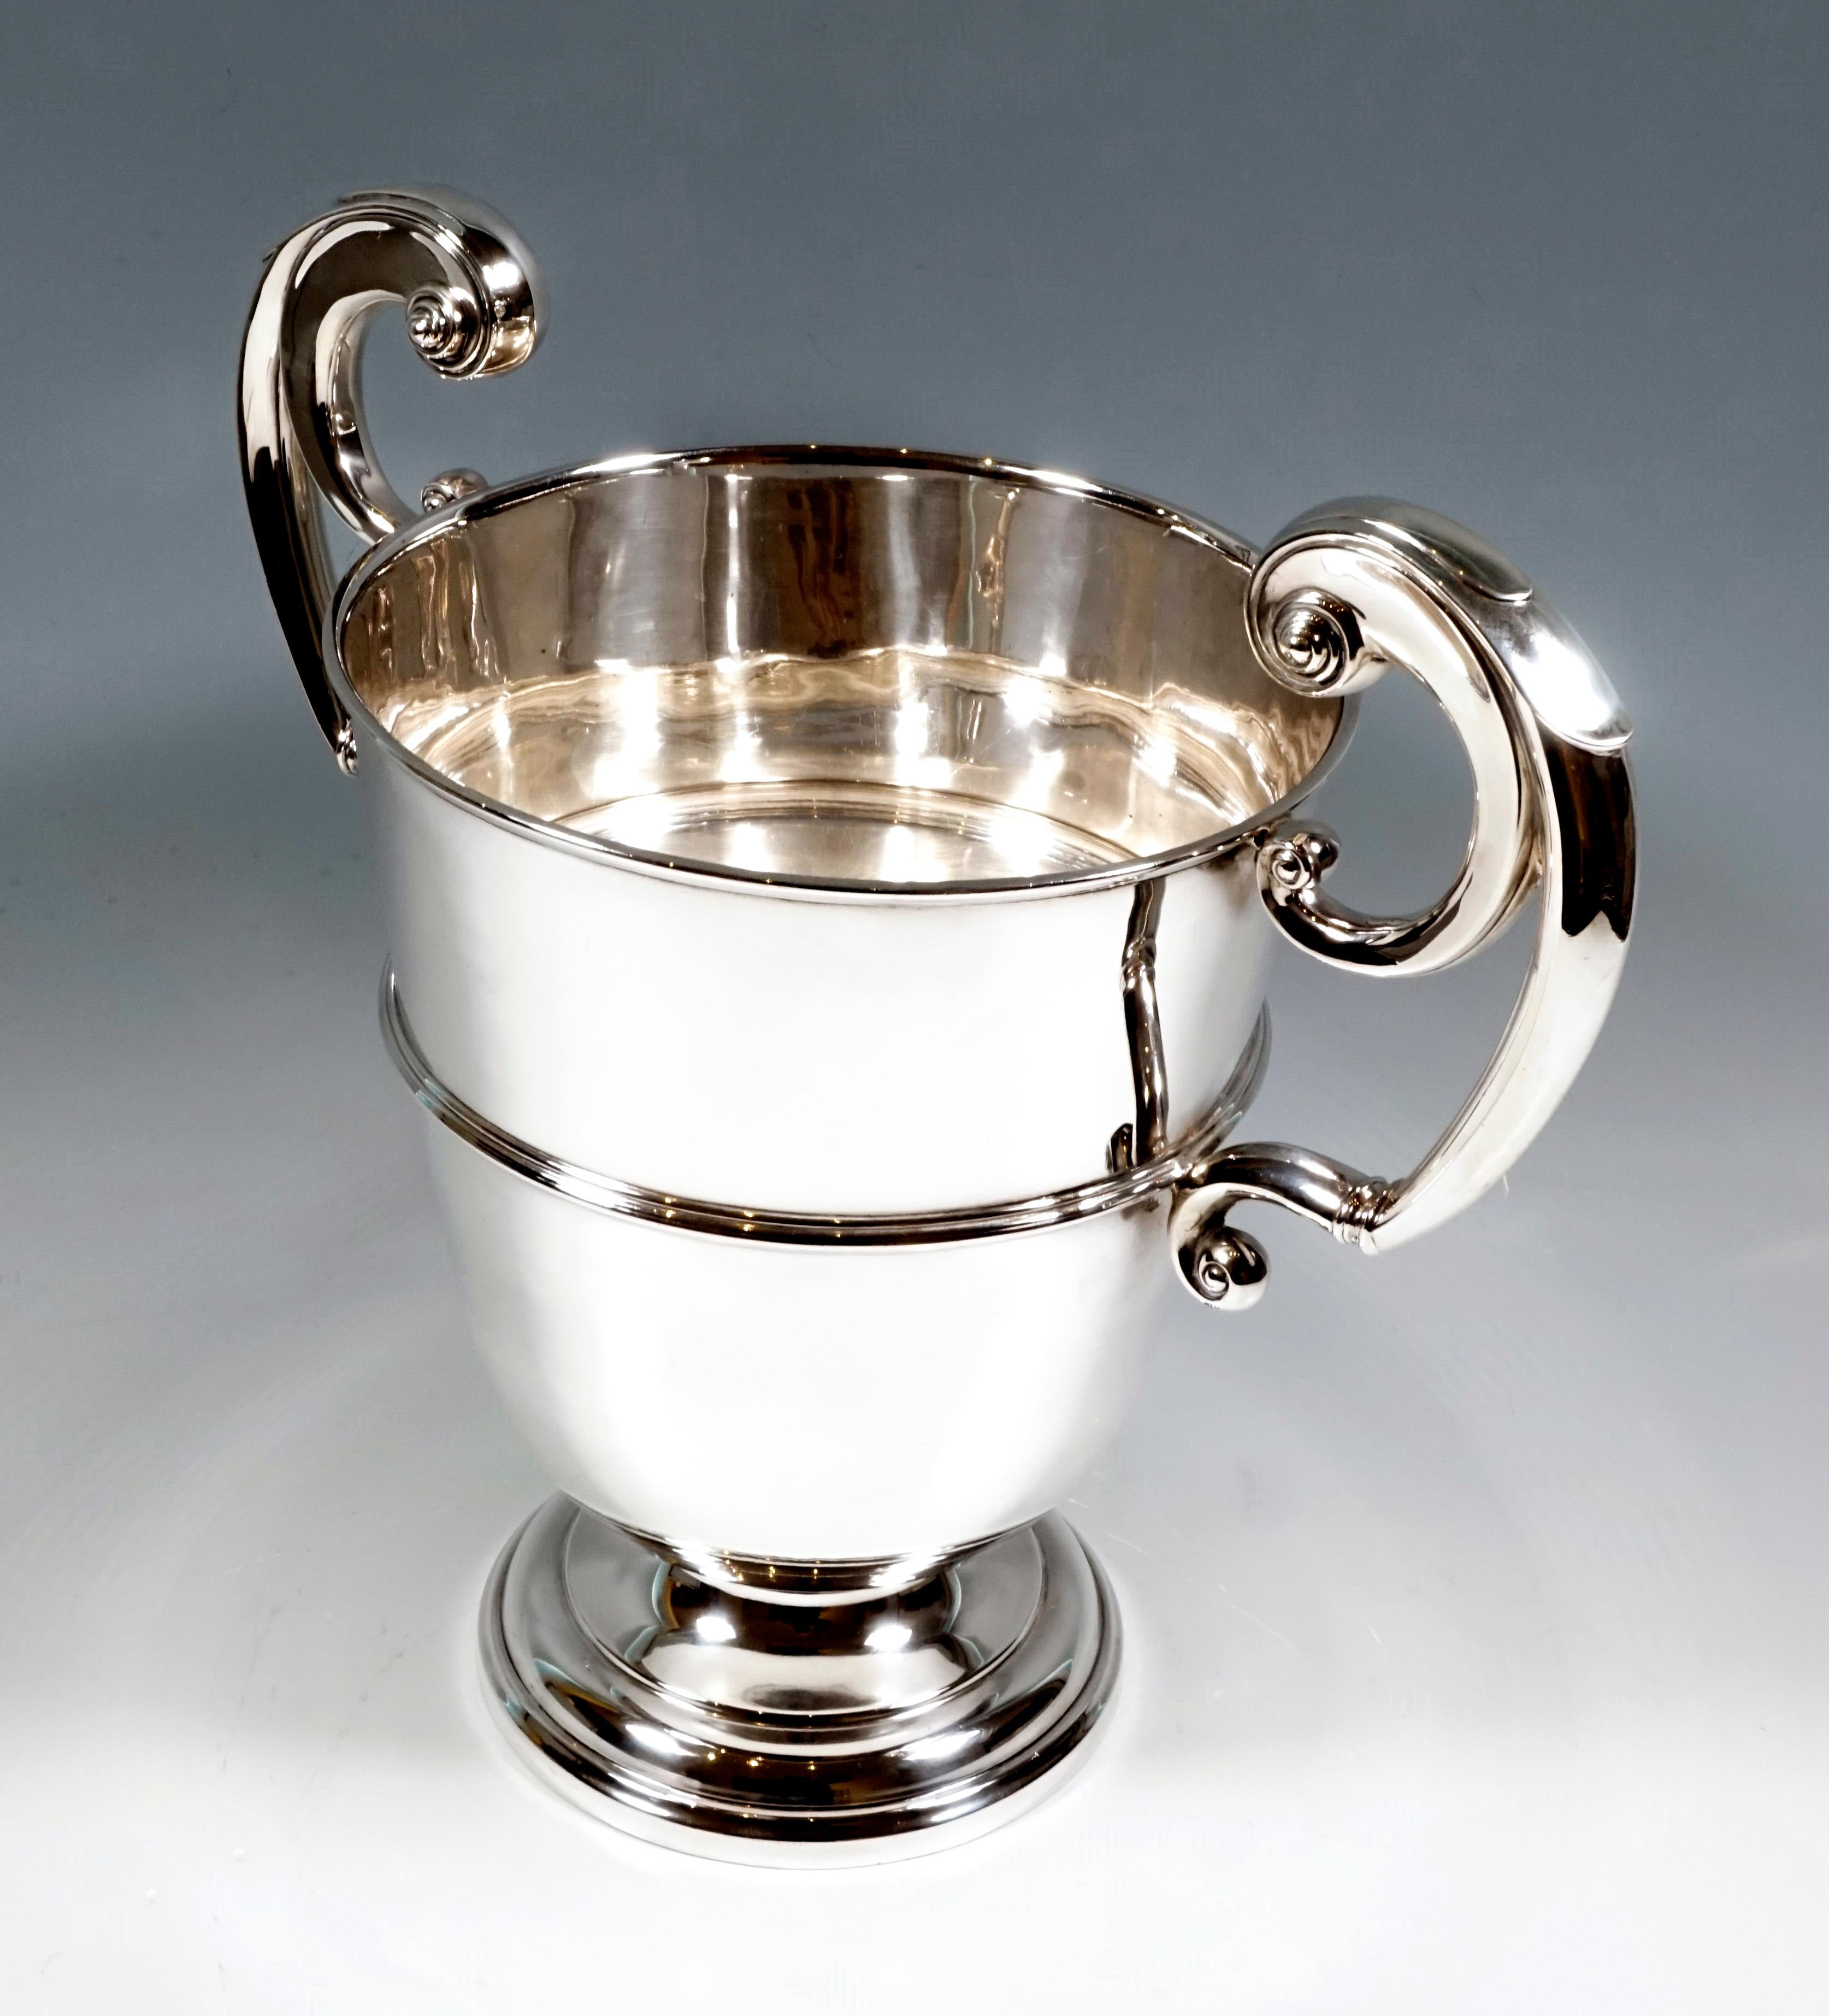 Elegant crater-shaped silver champagne cooler on an offset, stepped, round base with smooth, profiled walls and two large, raised volute-shaped handles.

925 silver

Hallmarks:
Master's sign 'WH&SSLD'- William Hutton & Sons Ltd., registered